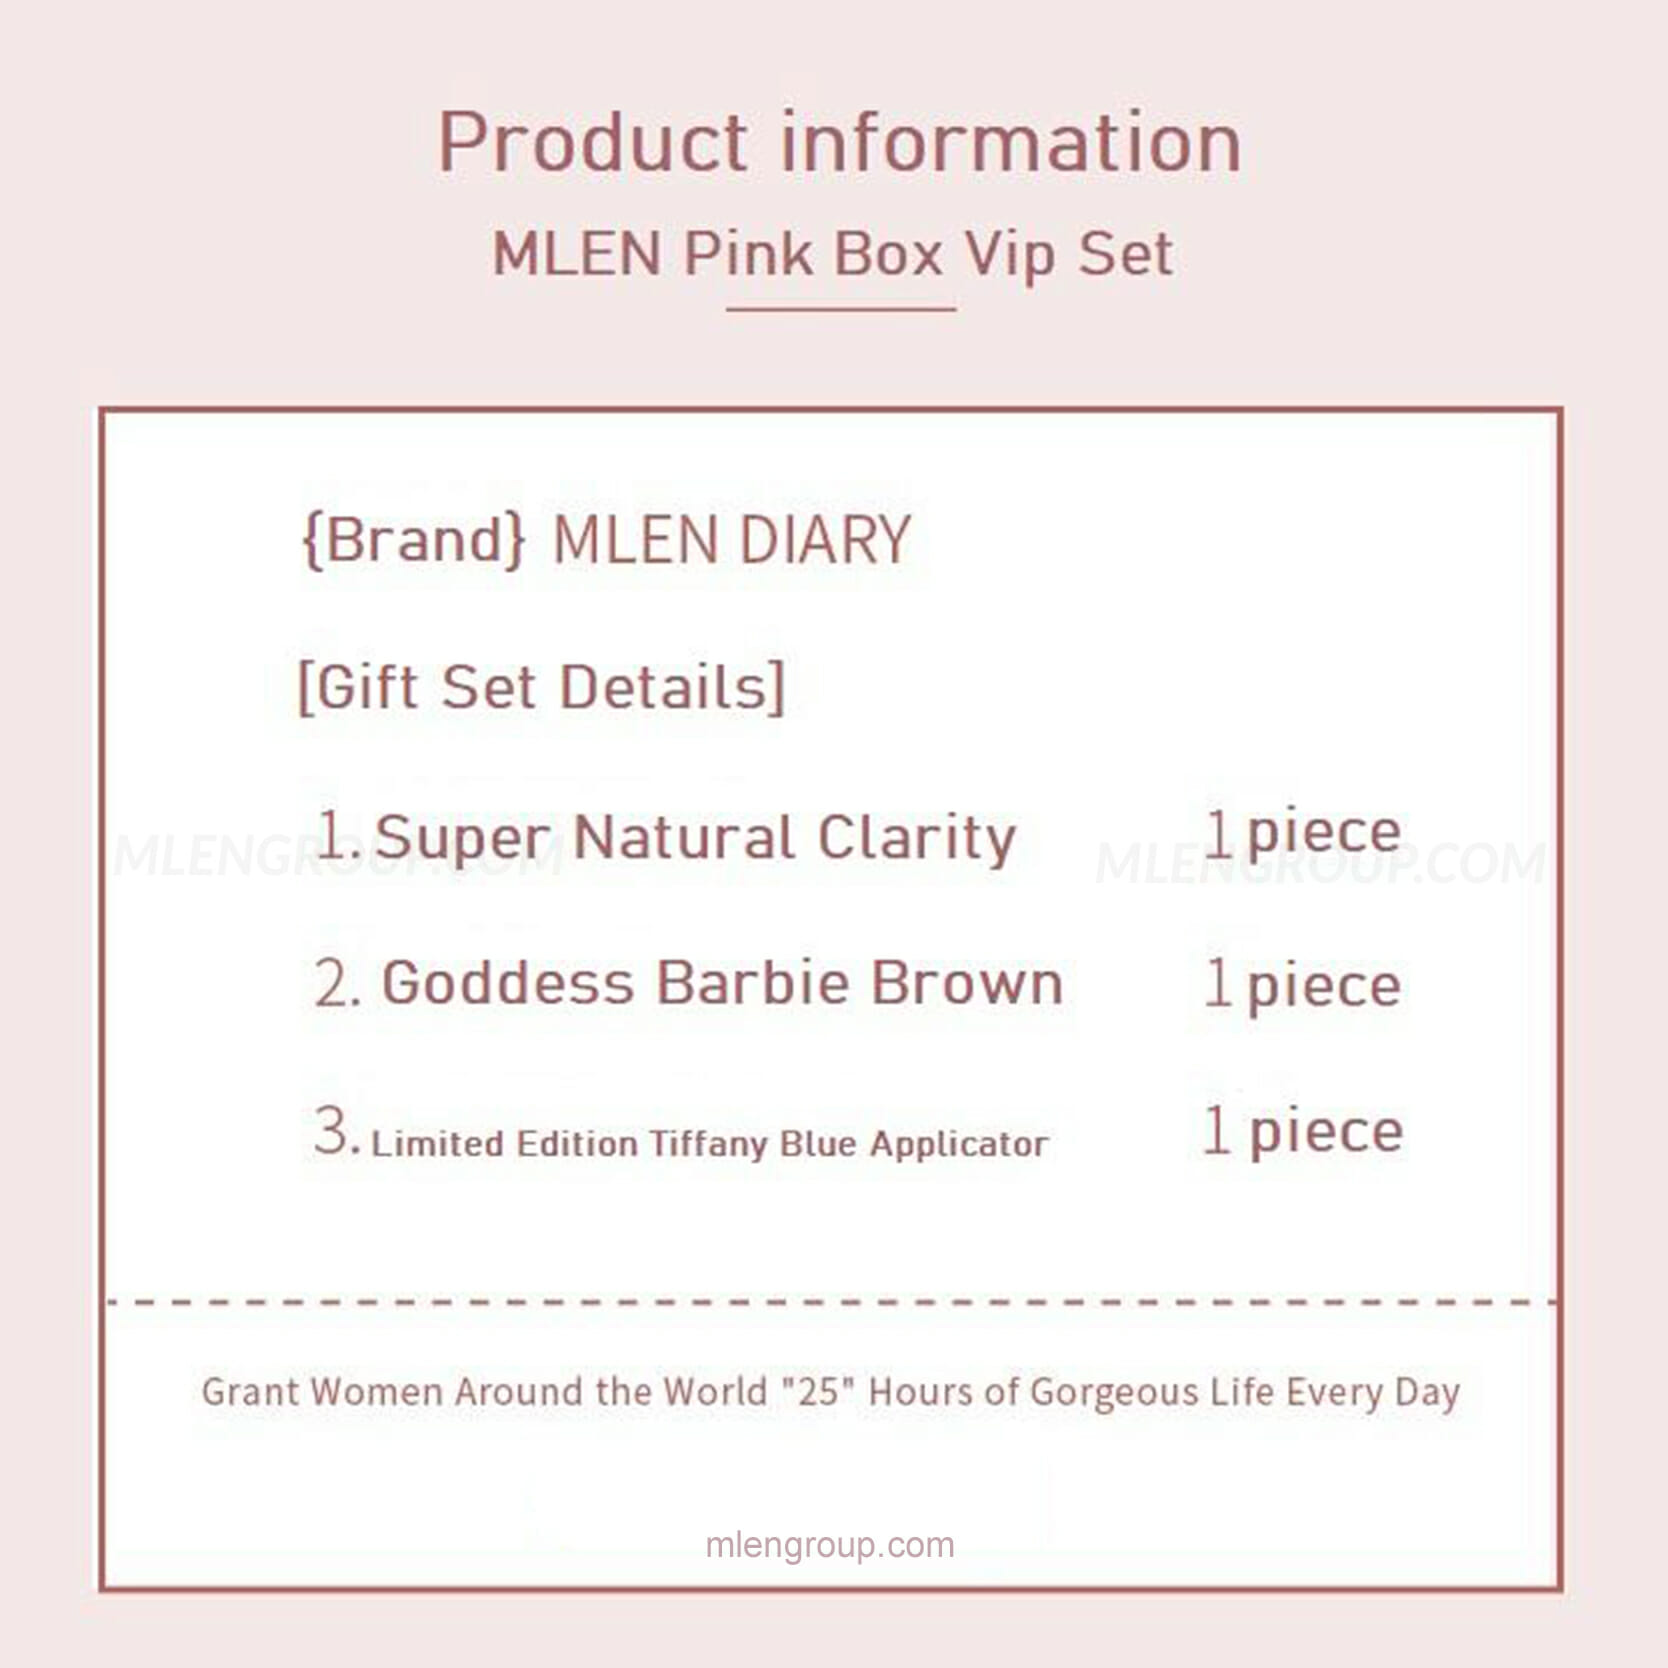 mlen group mlen pink box exclusive vip set (duo lashes style) 4